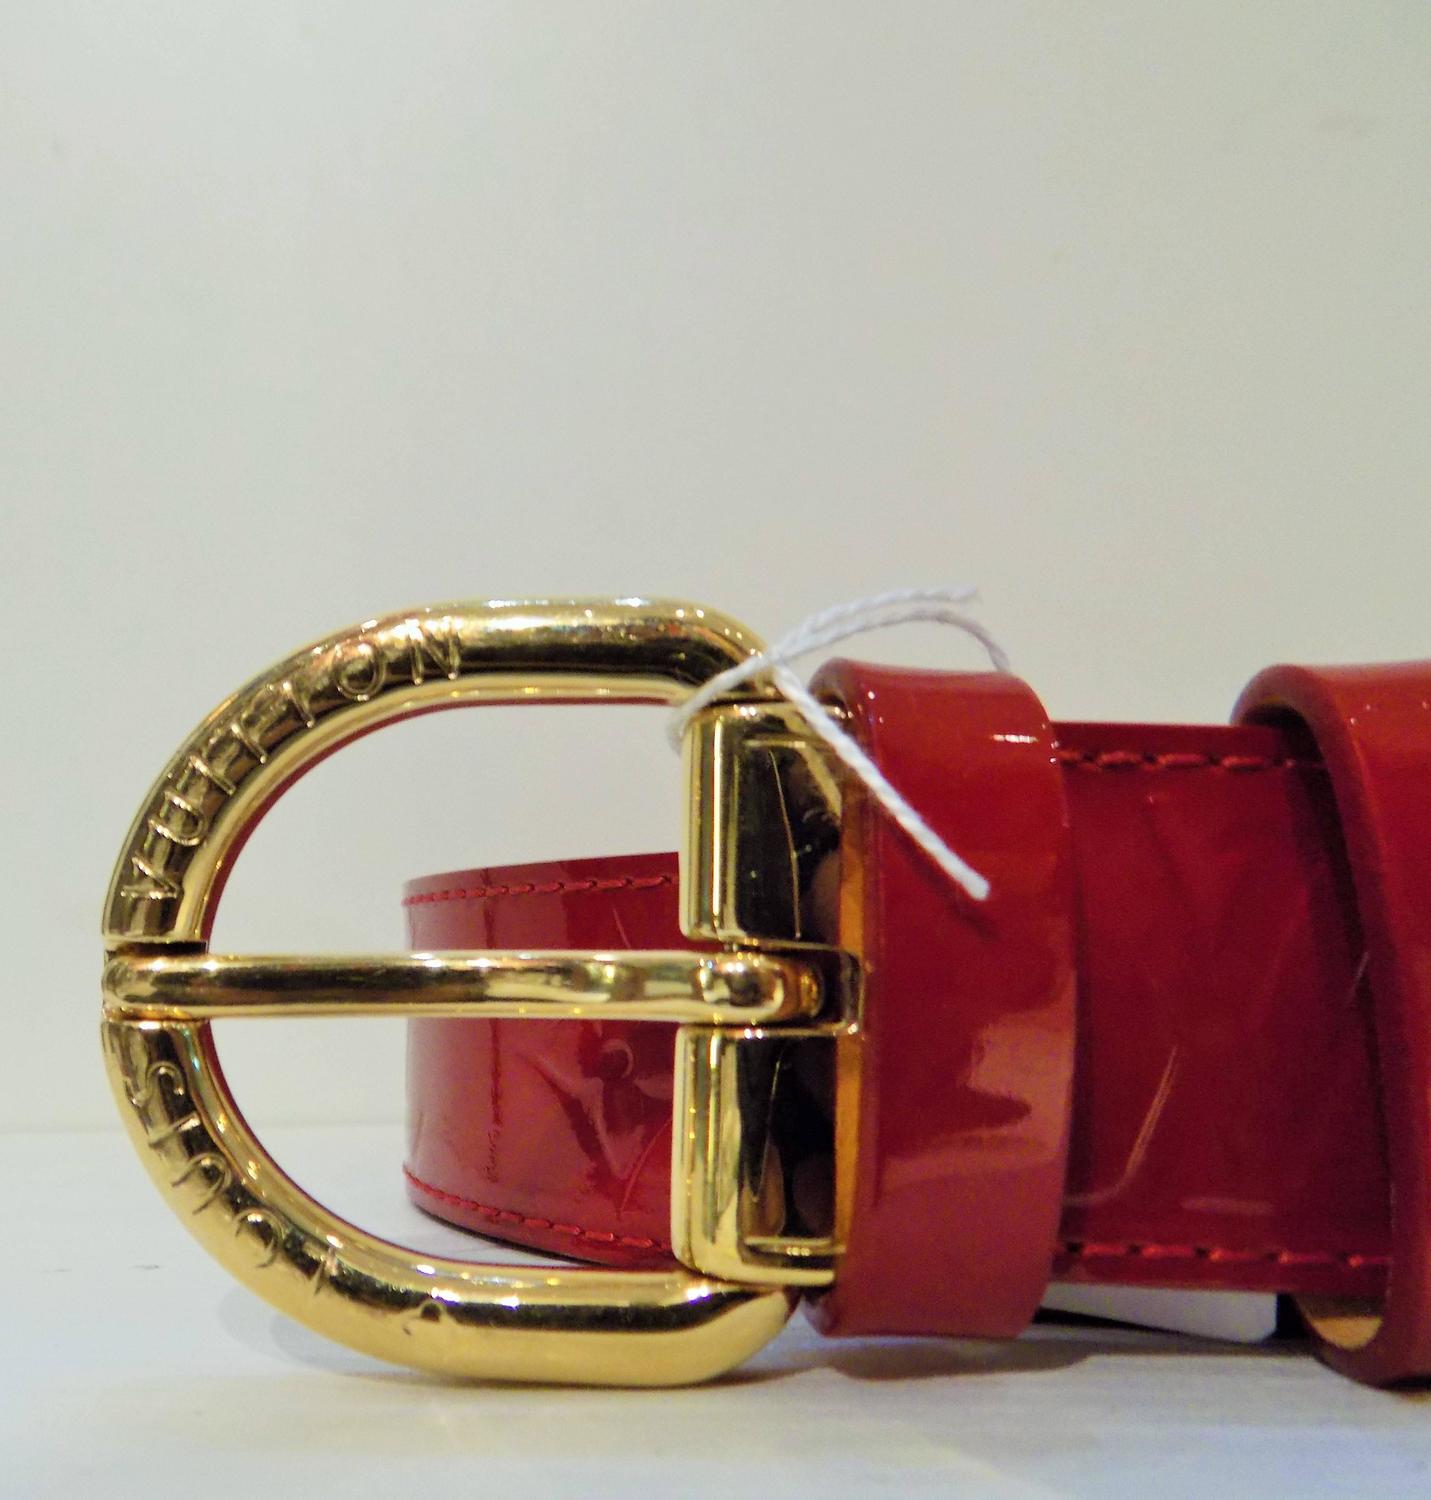 Louis Vuitton Red Belt For Sale at 1stdibs